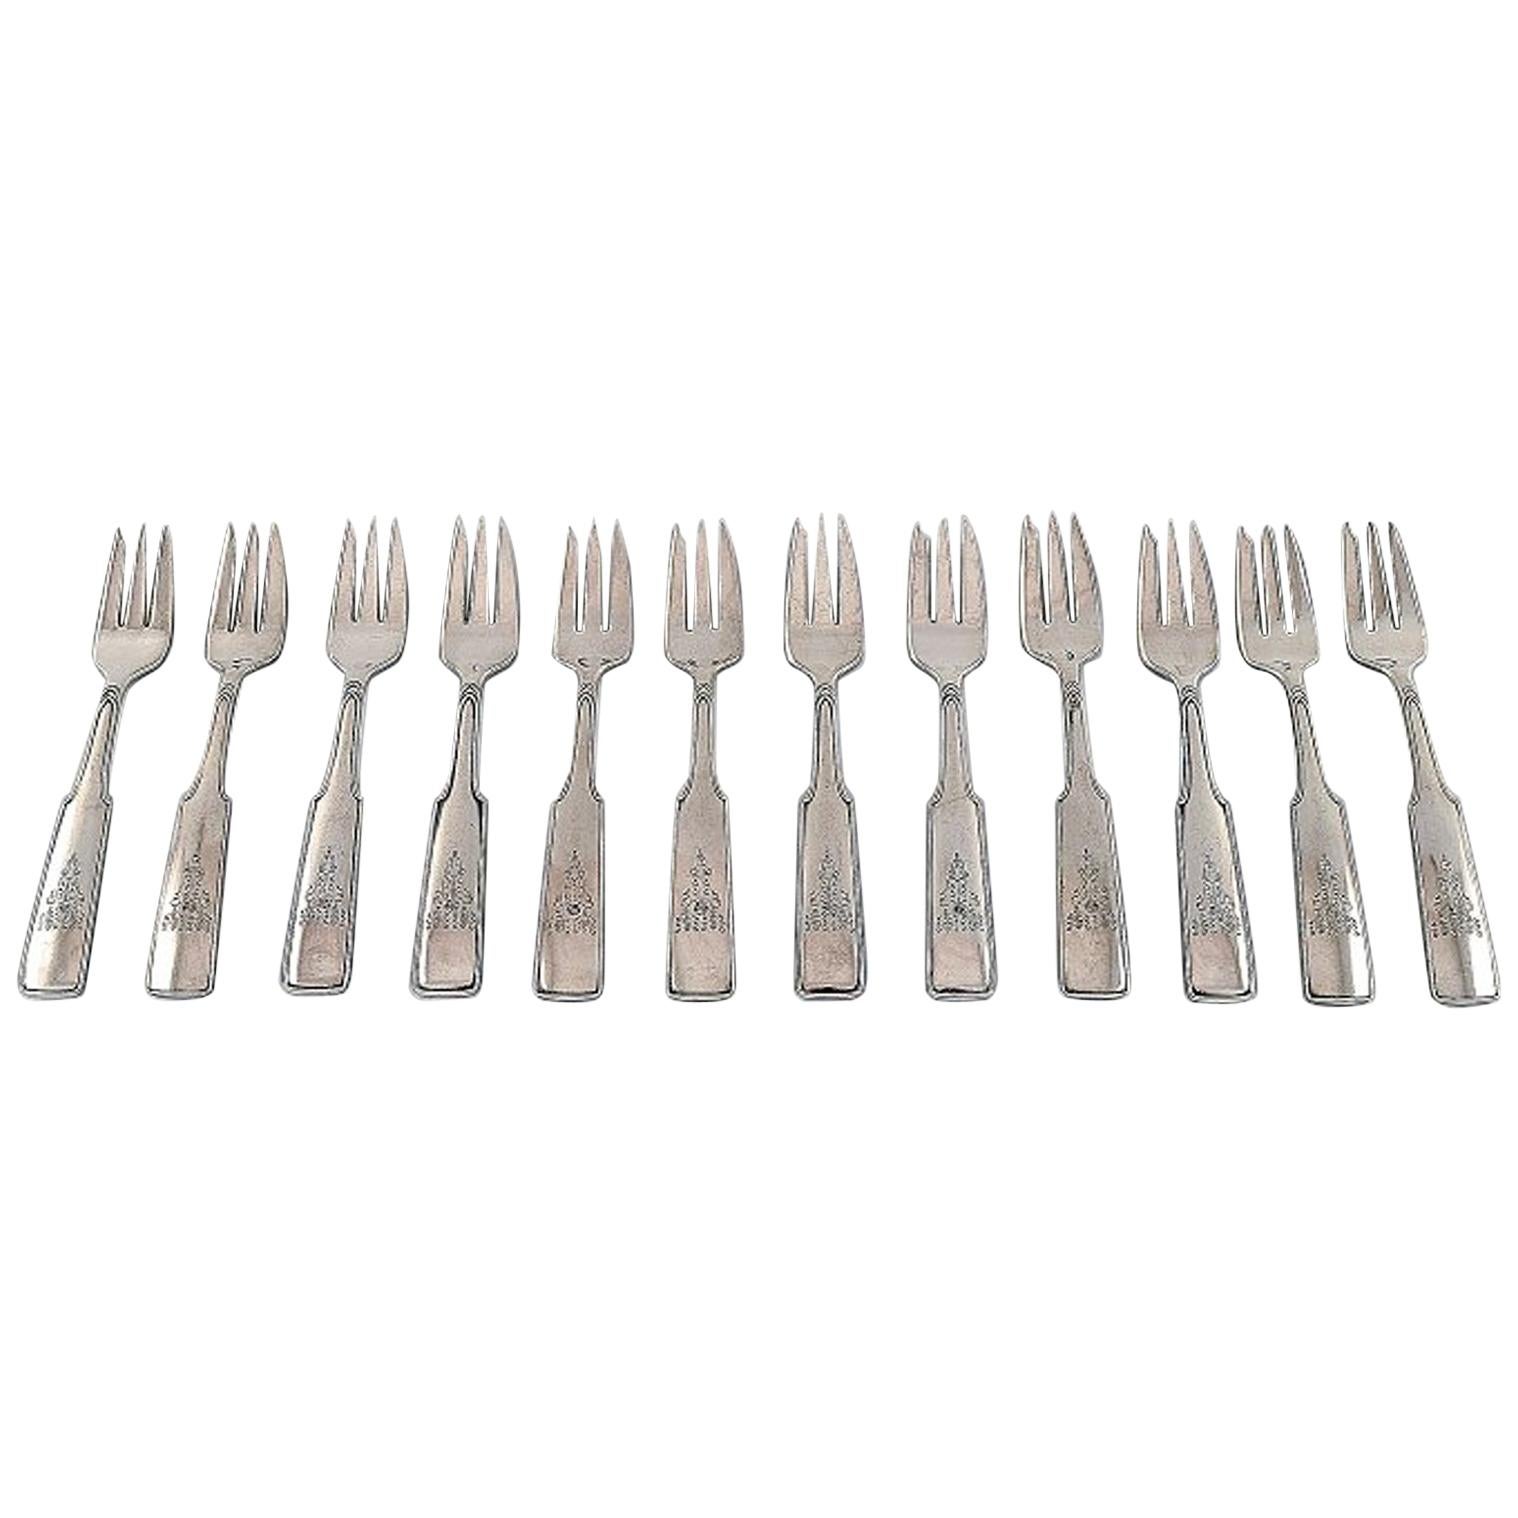 Hans Hansen Silverware Number 2, Set of 12 Pastry Forks in All Silver